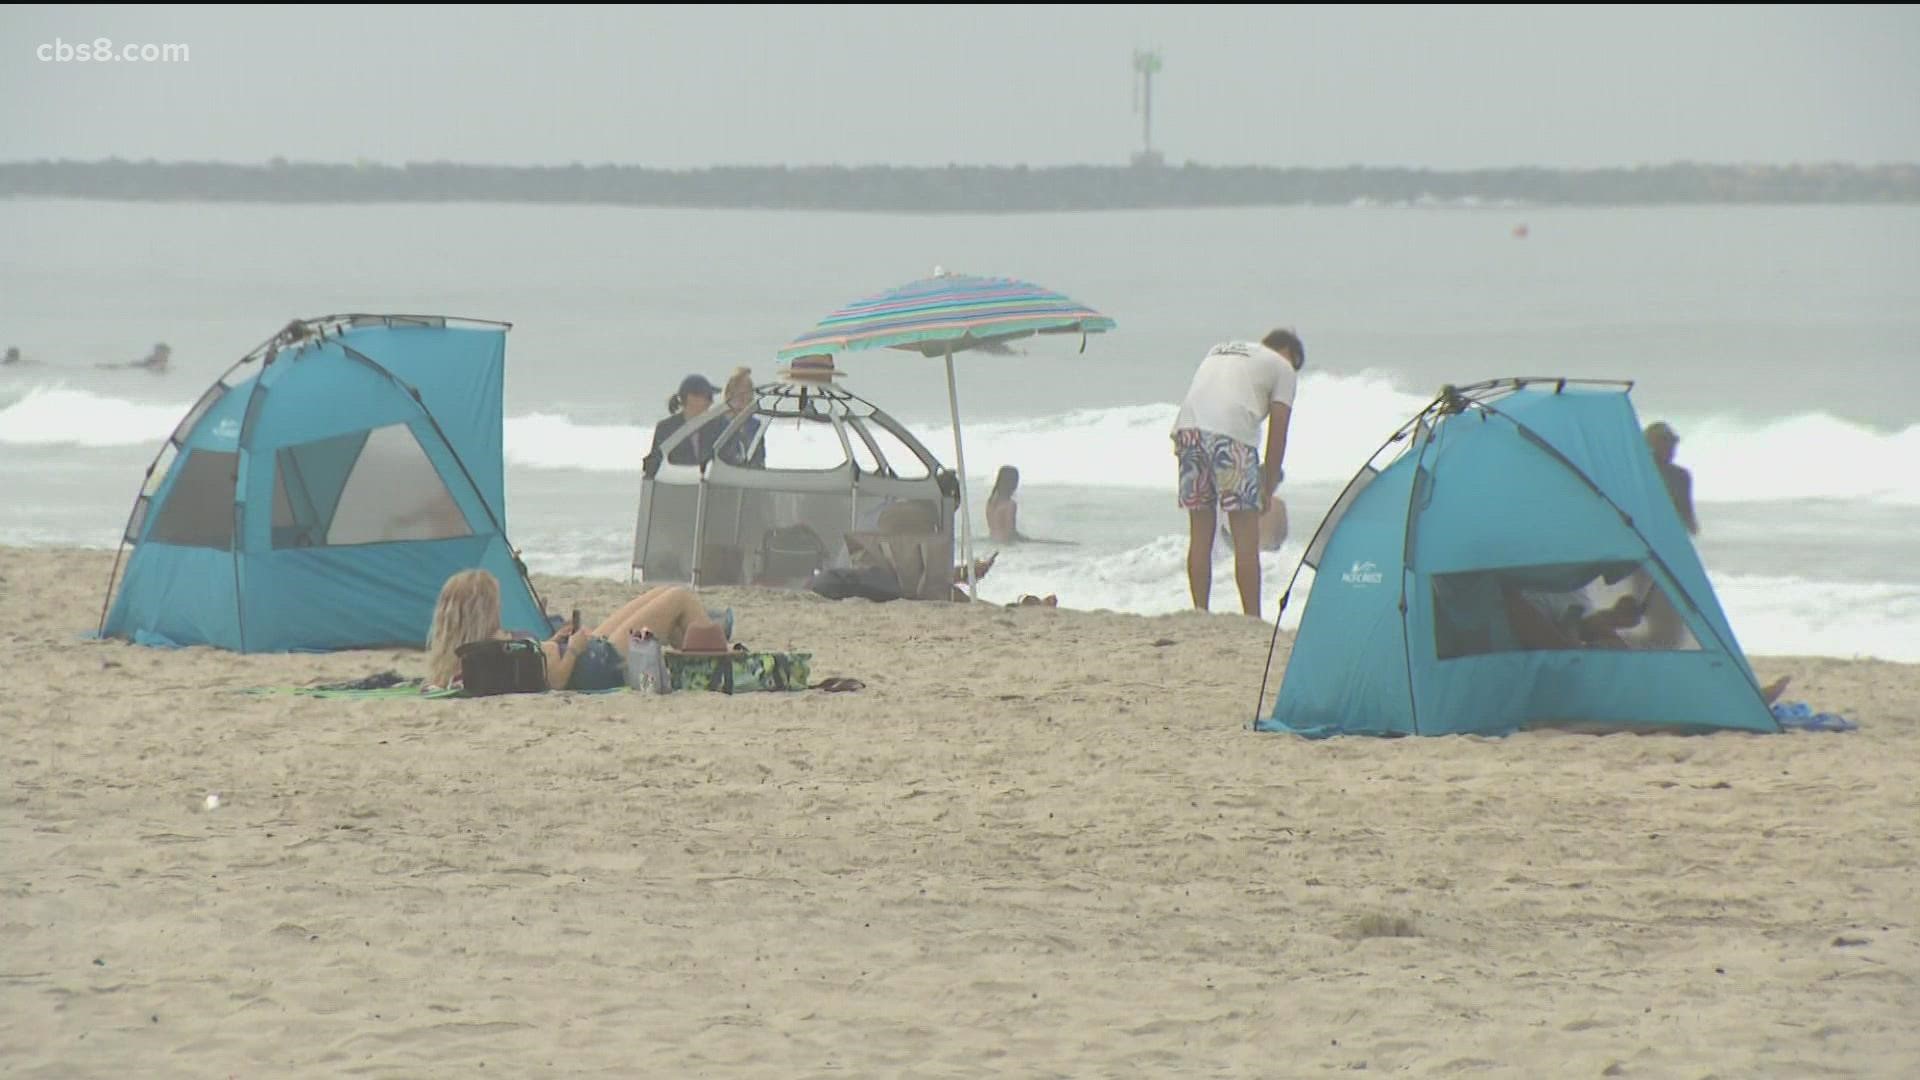 San Diego lifeguards and the National Weather Service were warning beachgoers of elevated surf, which can create dangerous swimming conditions, rip currents.